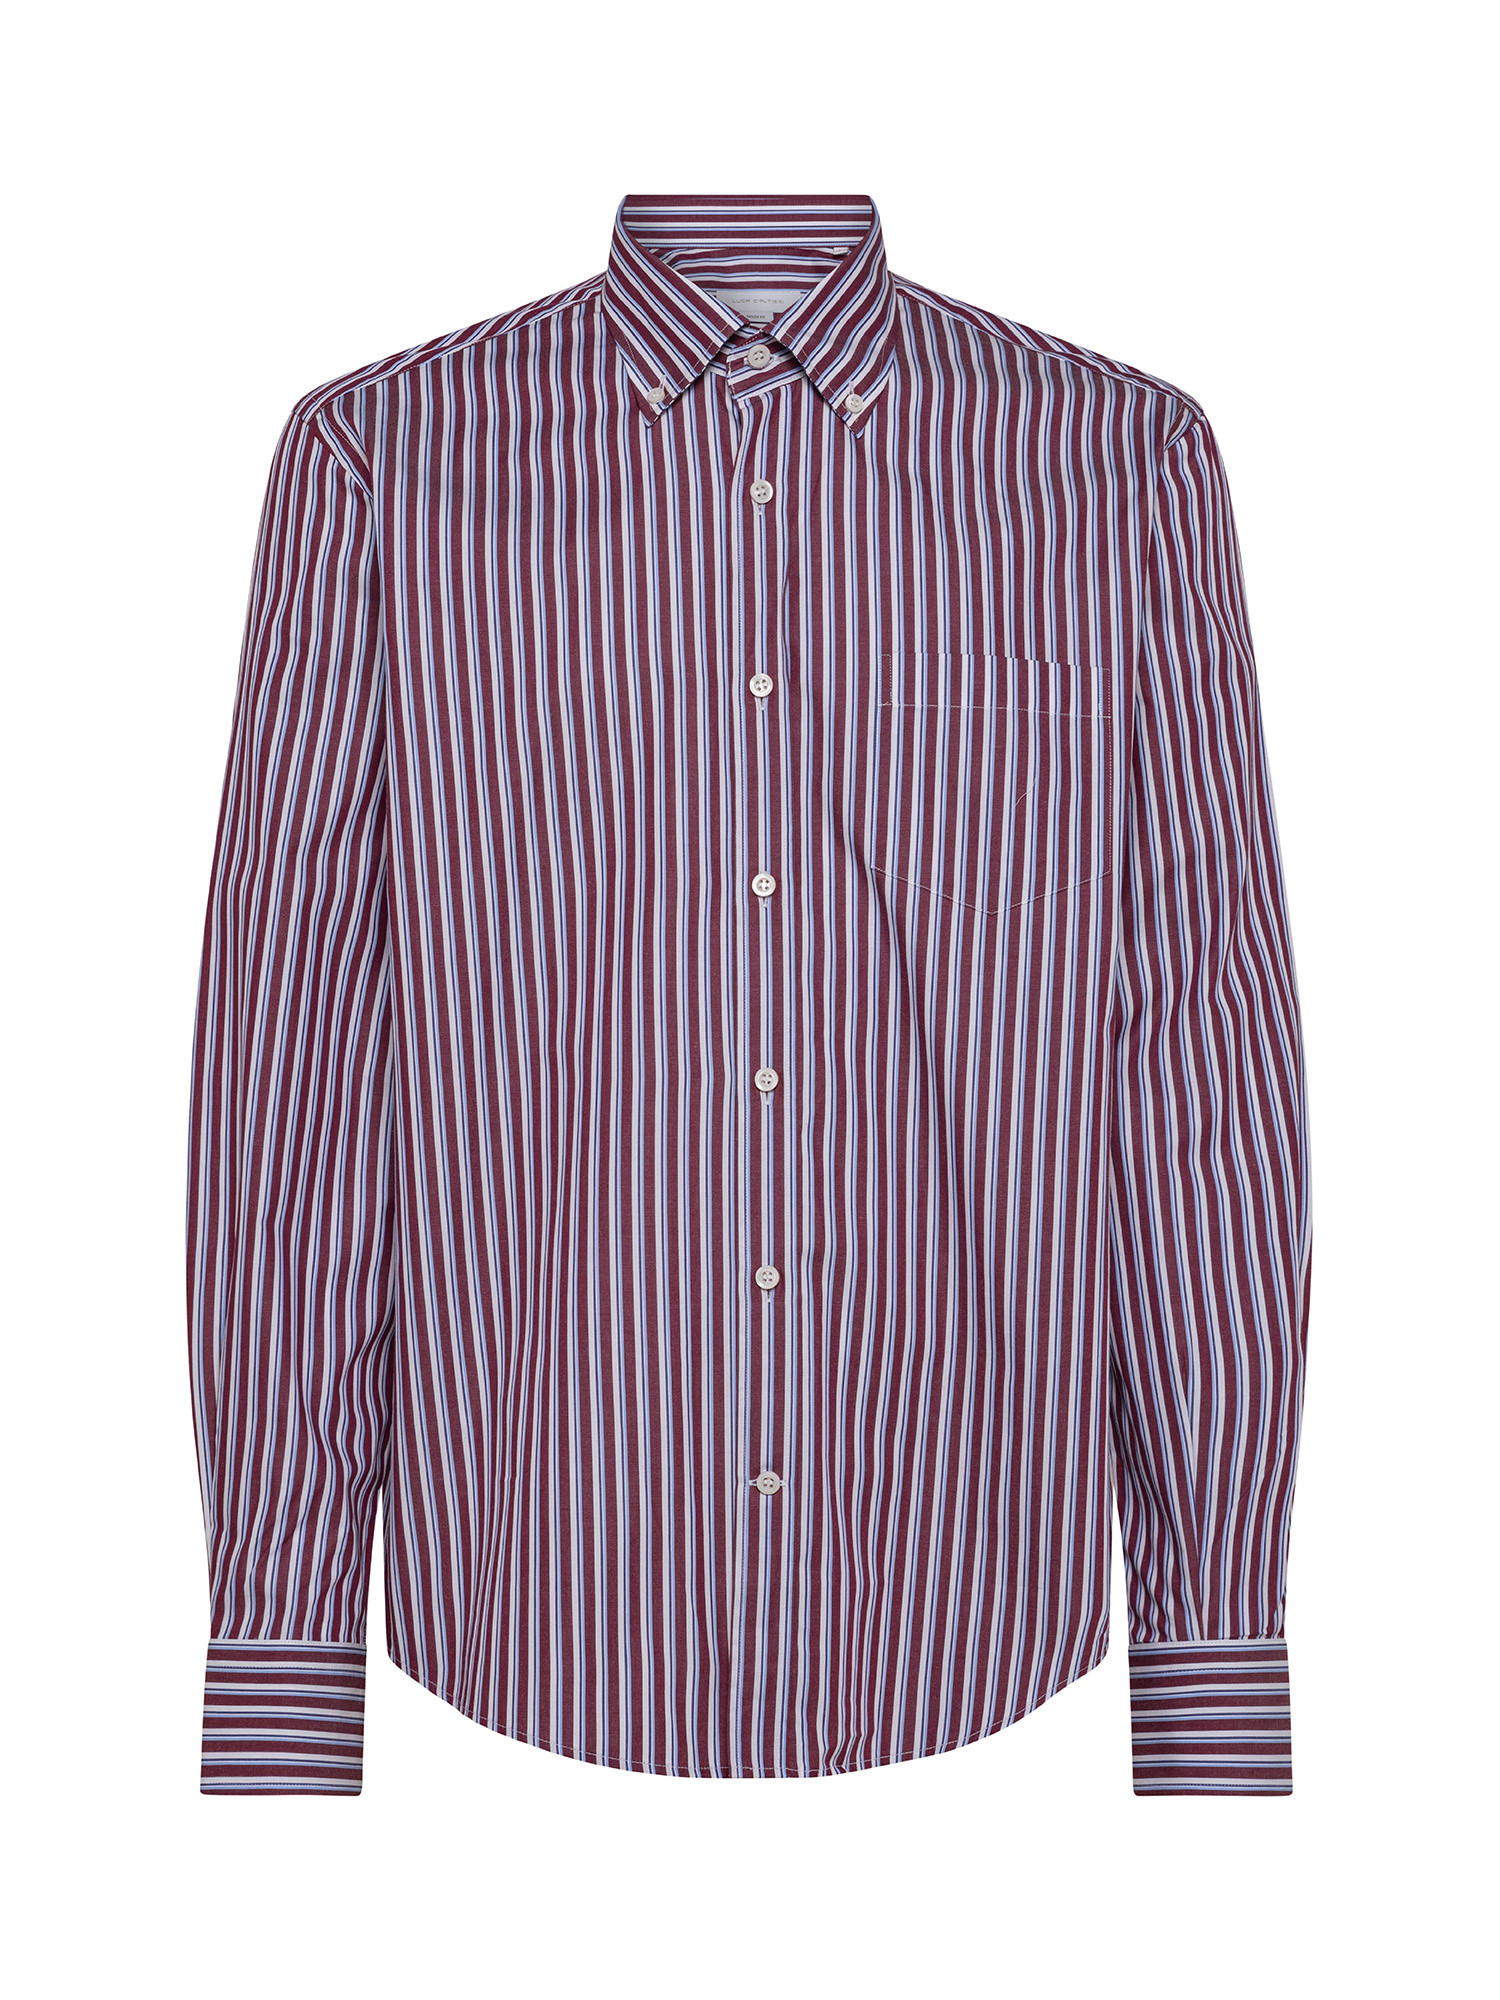 Luca D'Altieri - Tailor fit striped shirt in pure cotton, Red Bordeaux, large image number 1